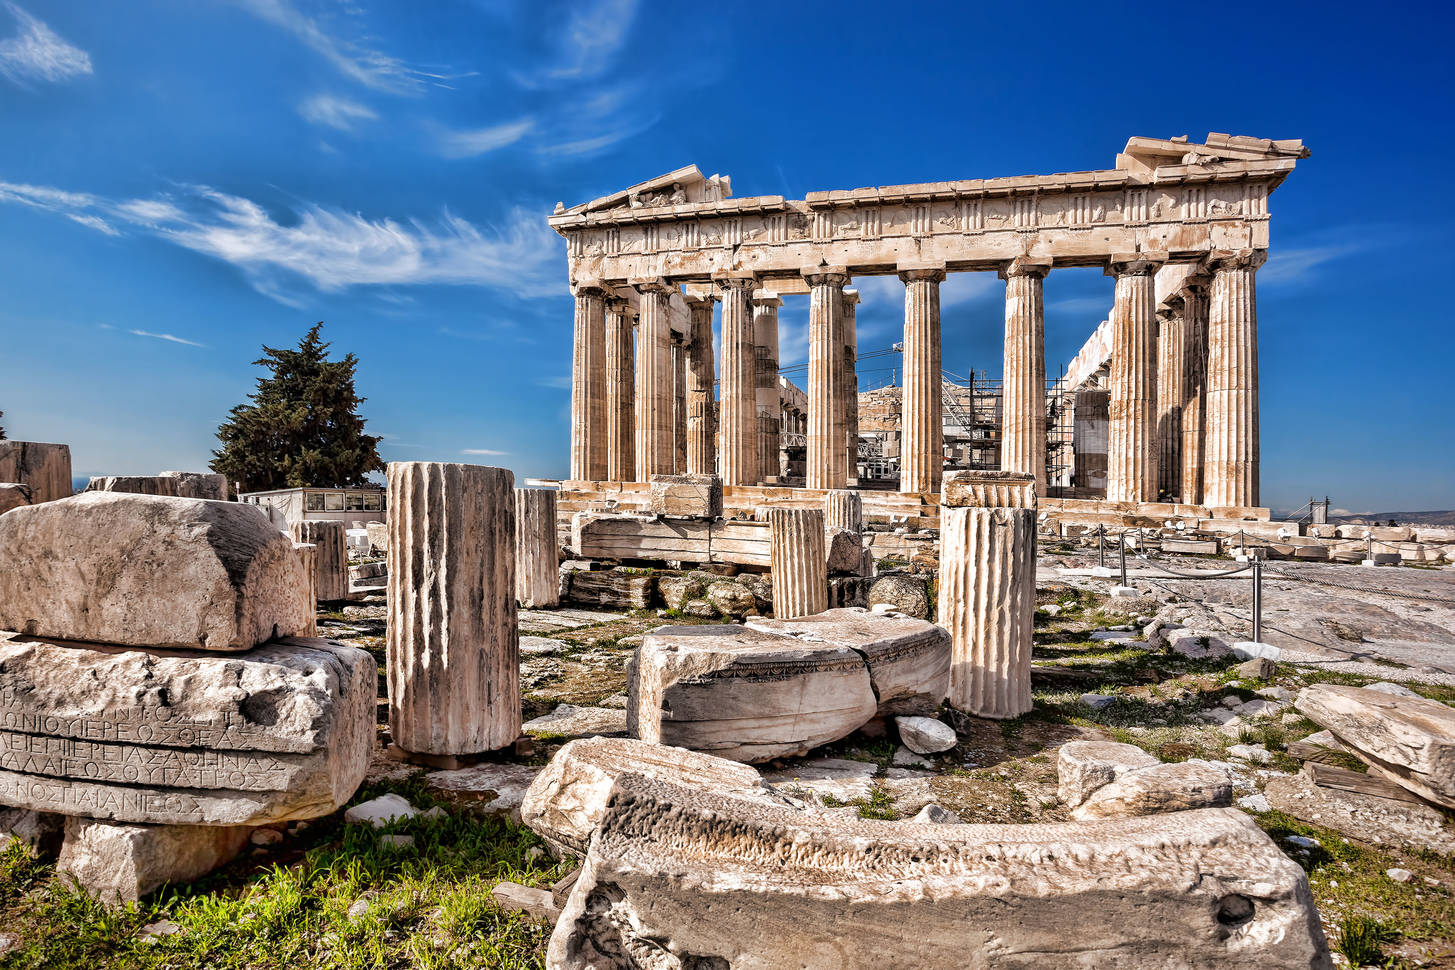 View of the Parthenon temple.